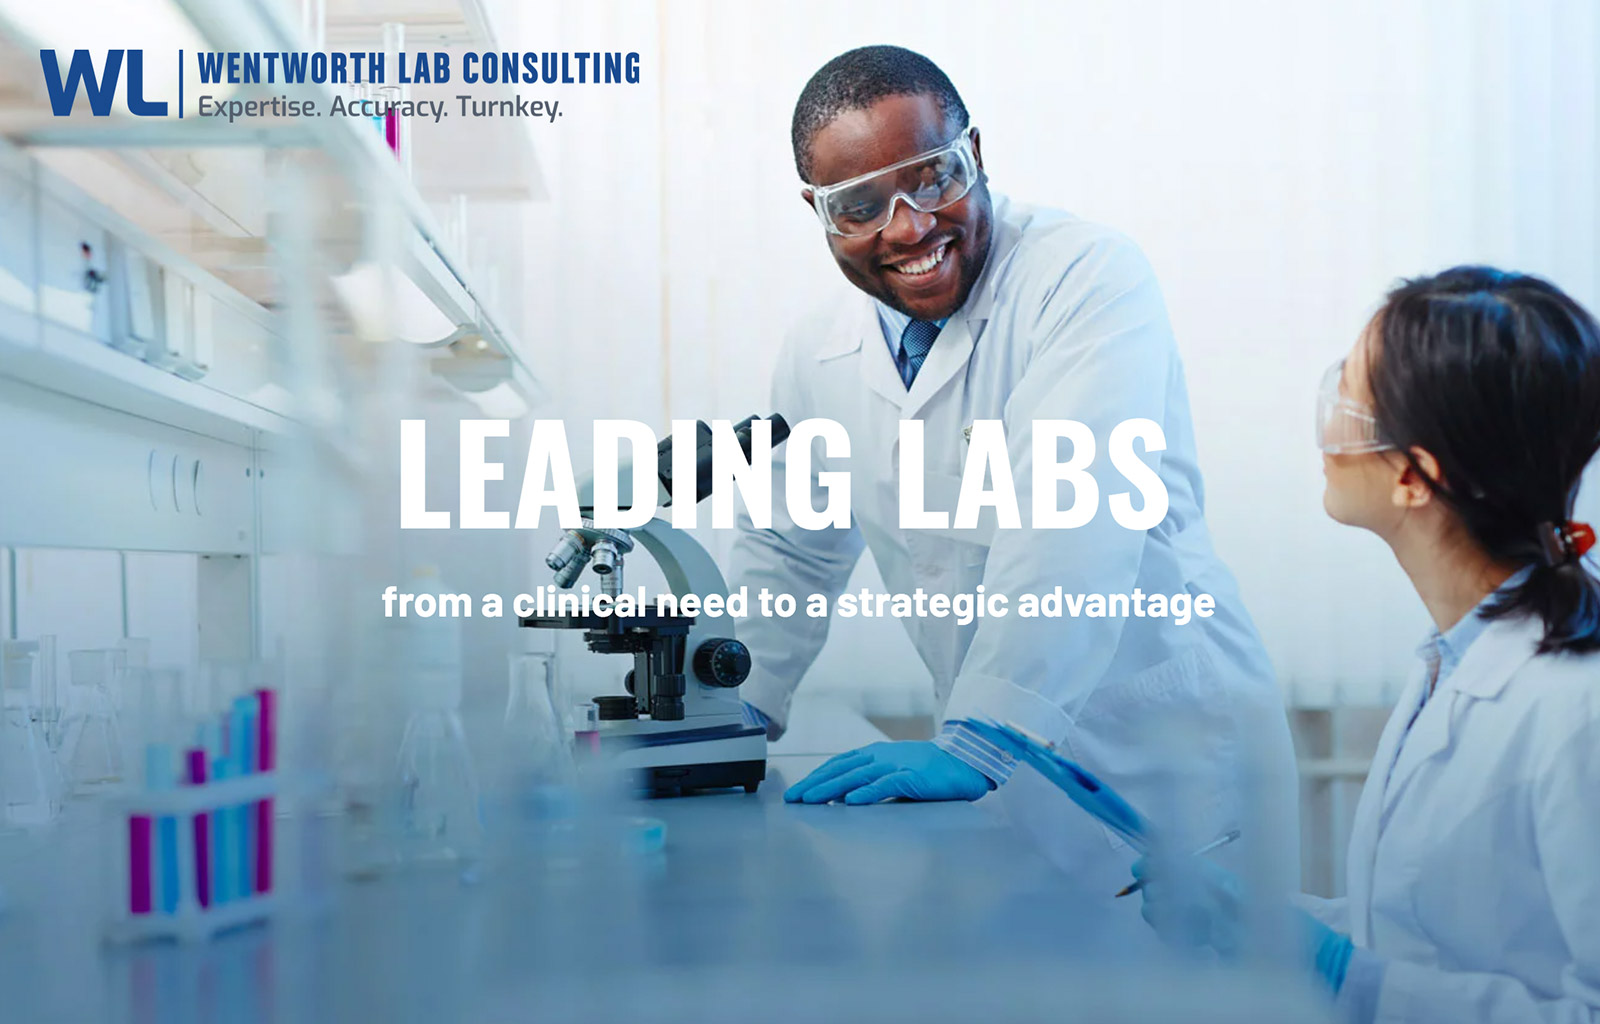 Wentworth Lab Consulting